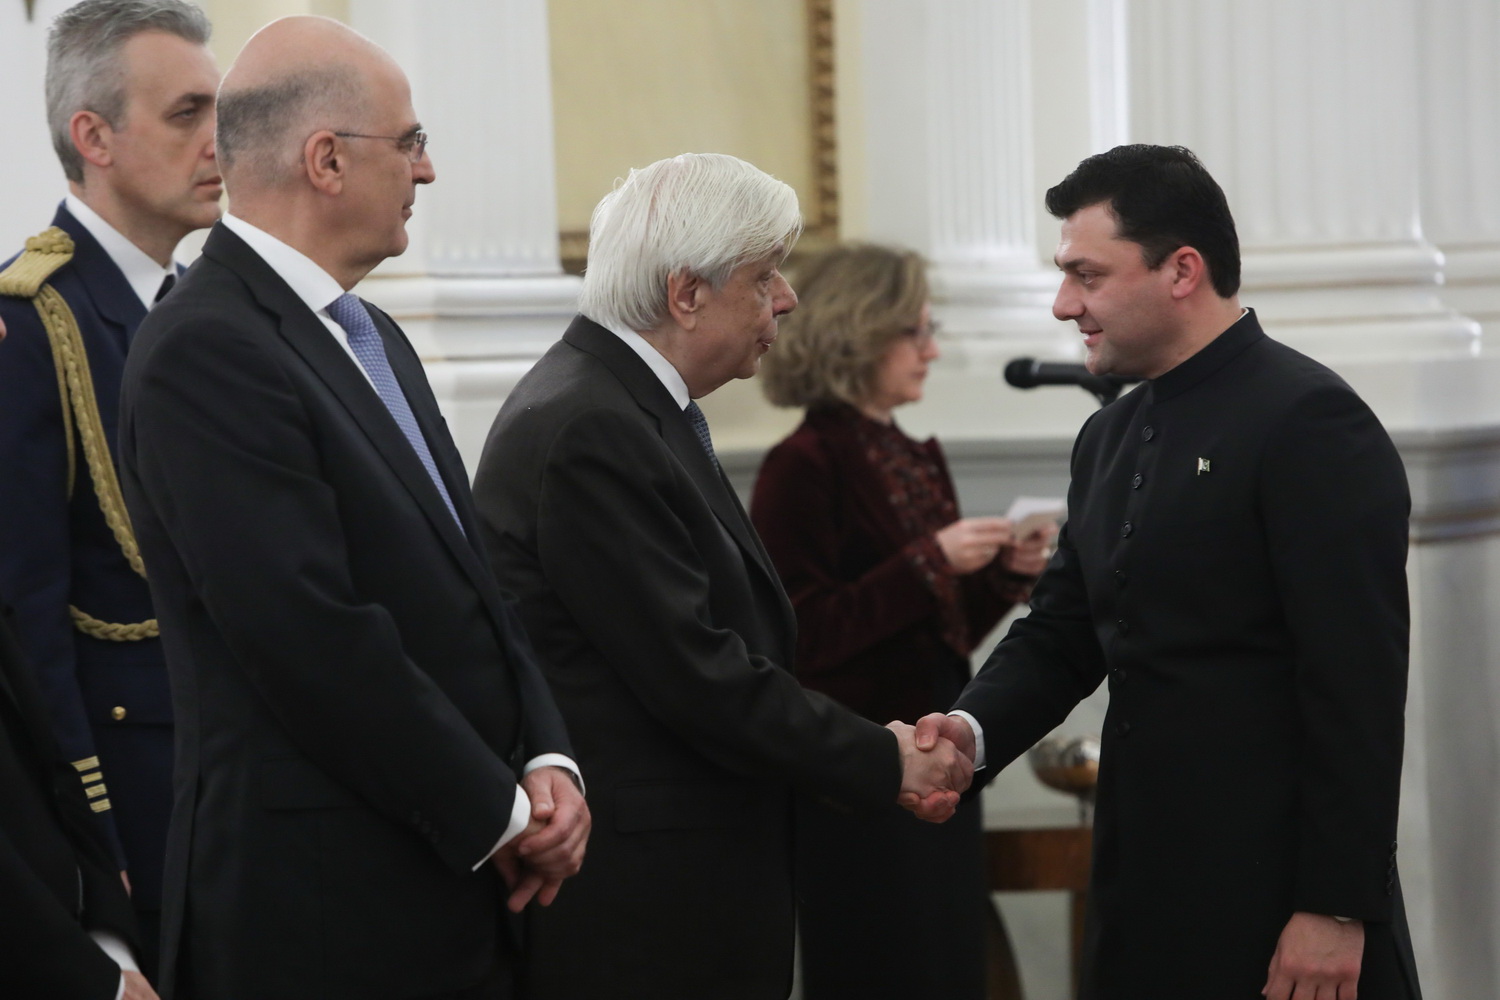 Meeting of Chargé d’affaires with the Greek President